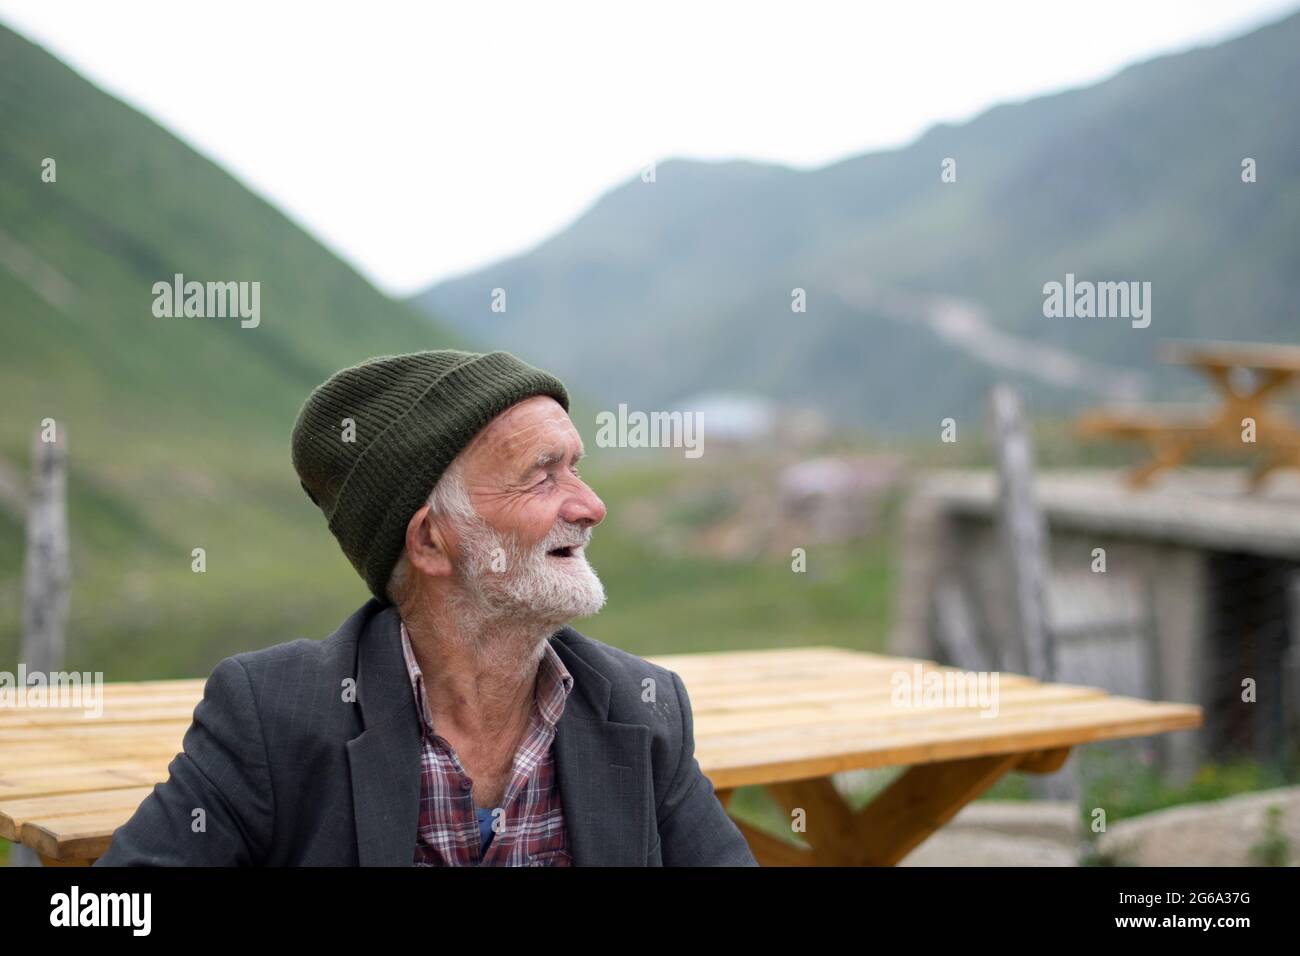 Rize, TURKEY - July 31, 2015: Avusor or Avusör is a plateau in the Çamlıhemşin district of Rize province. Old man sitting in front of his house in the Stock Photo